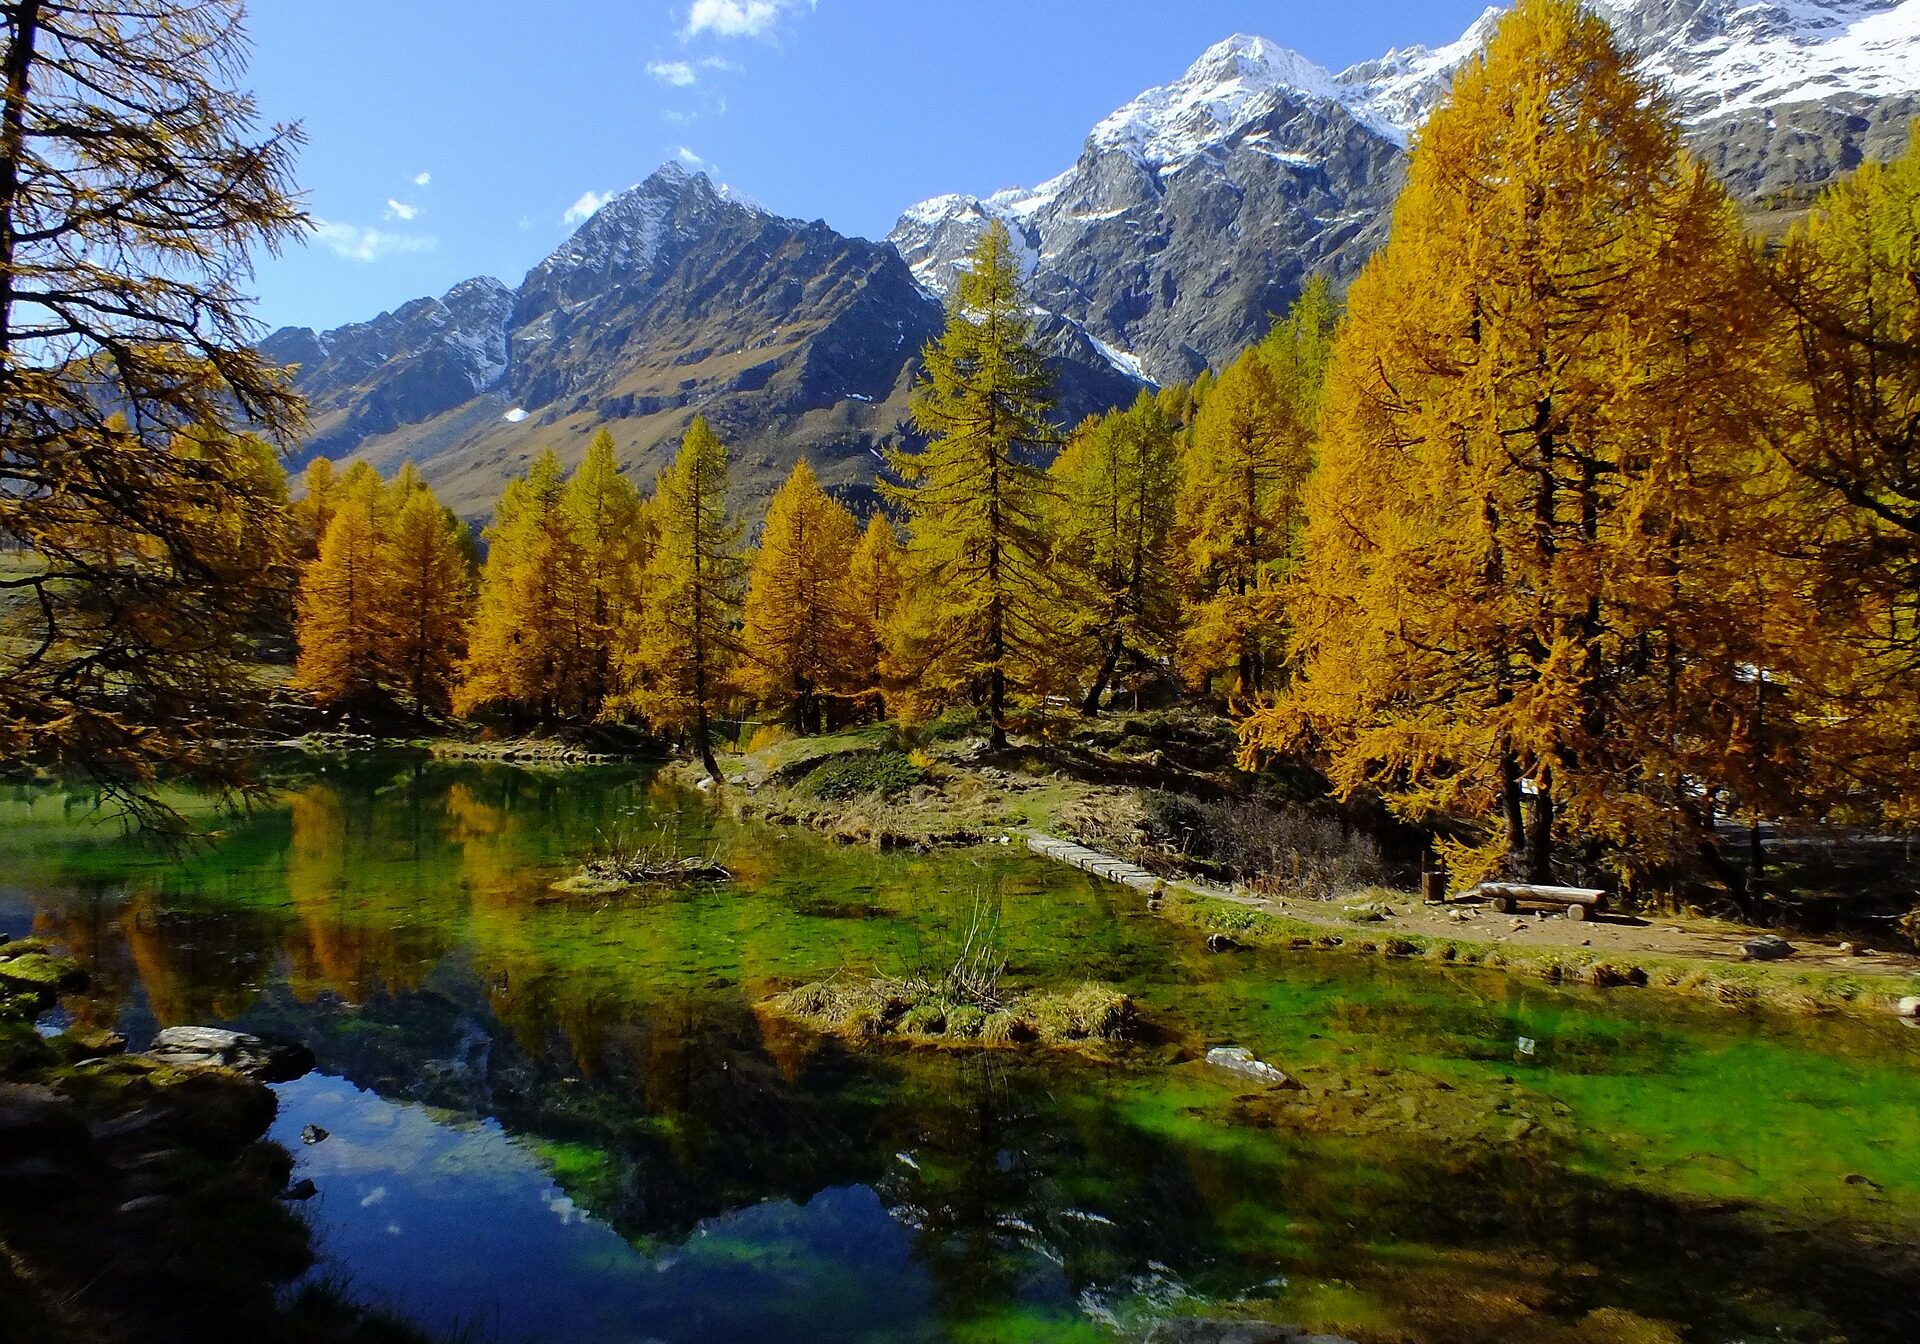 A lake surrounded by trees and mountains in the background.